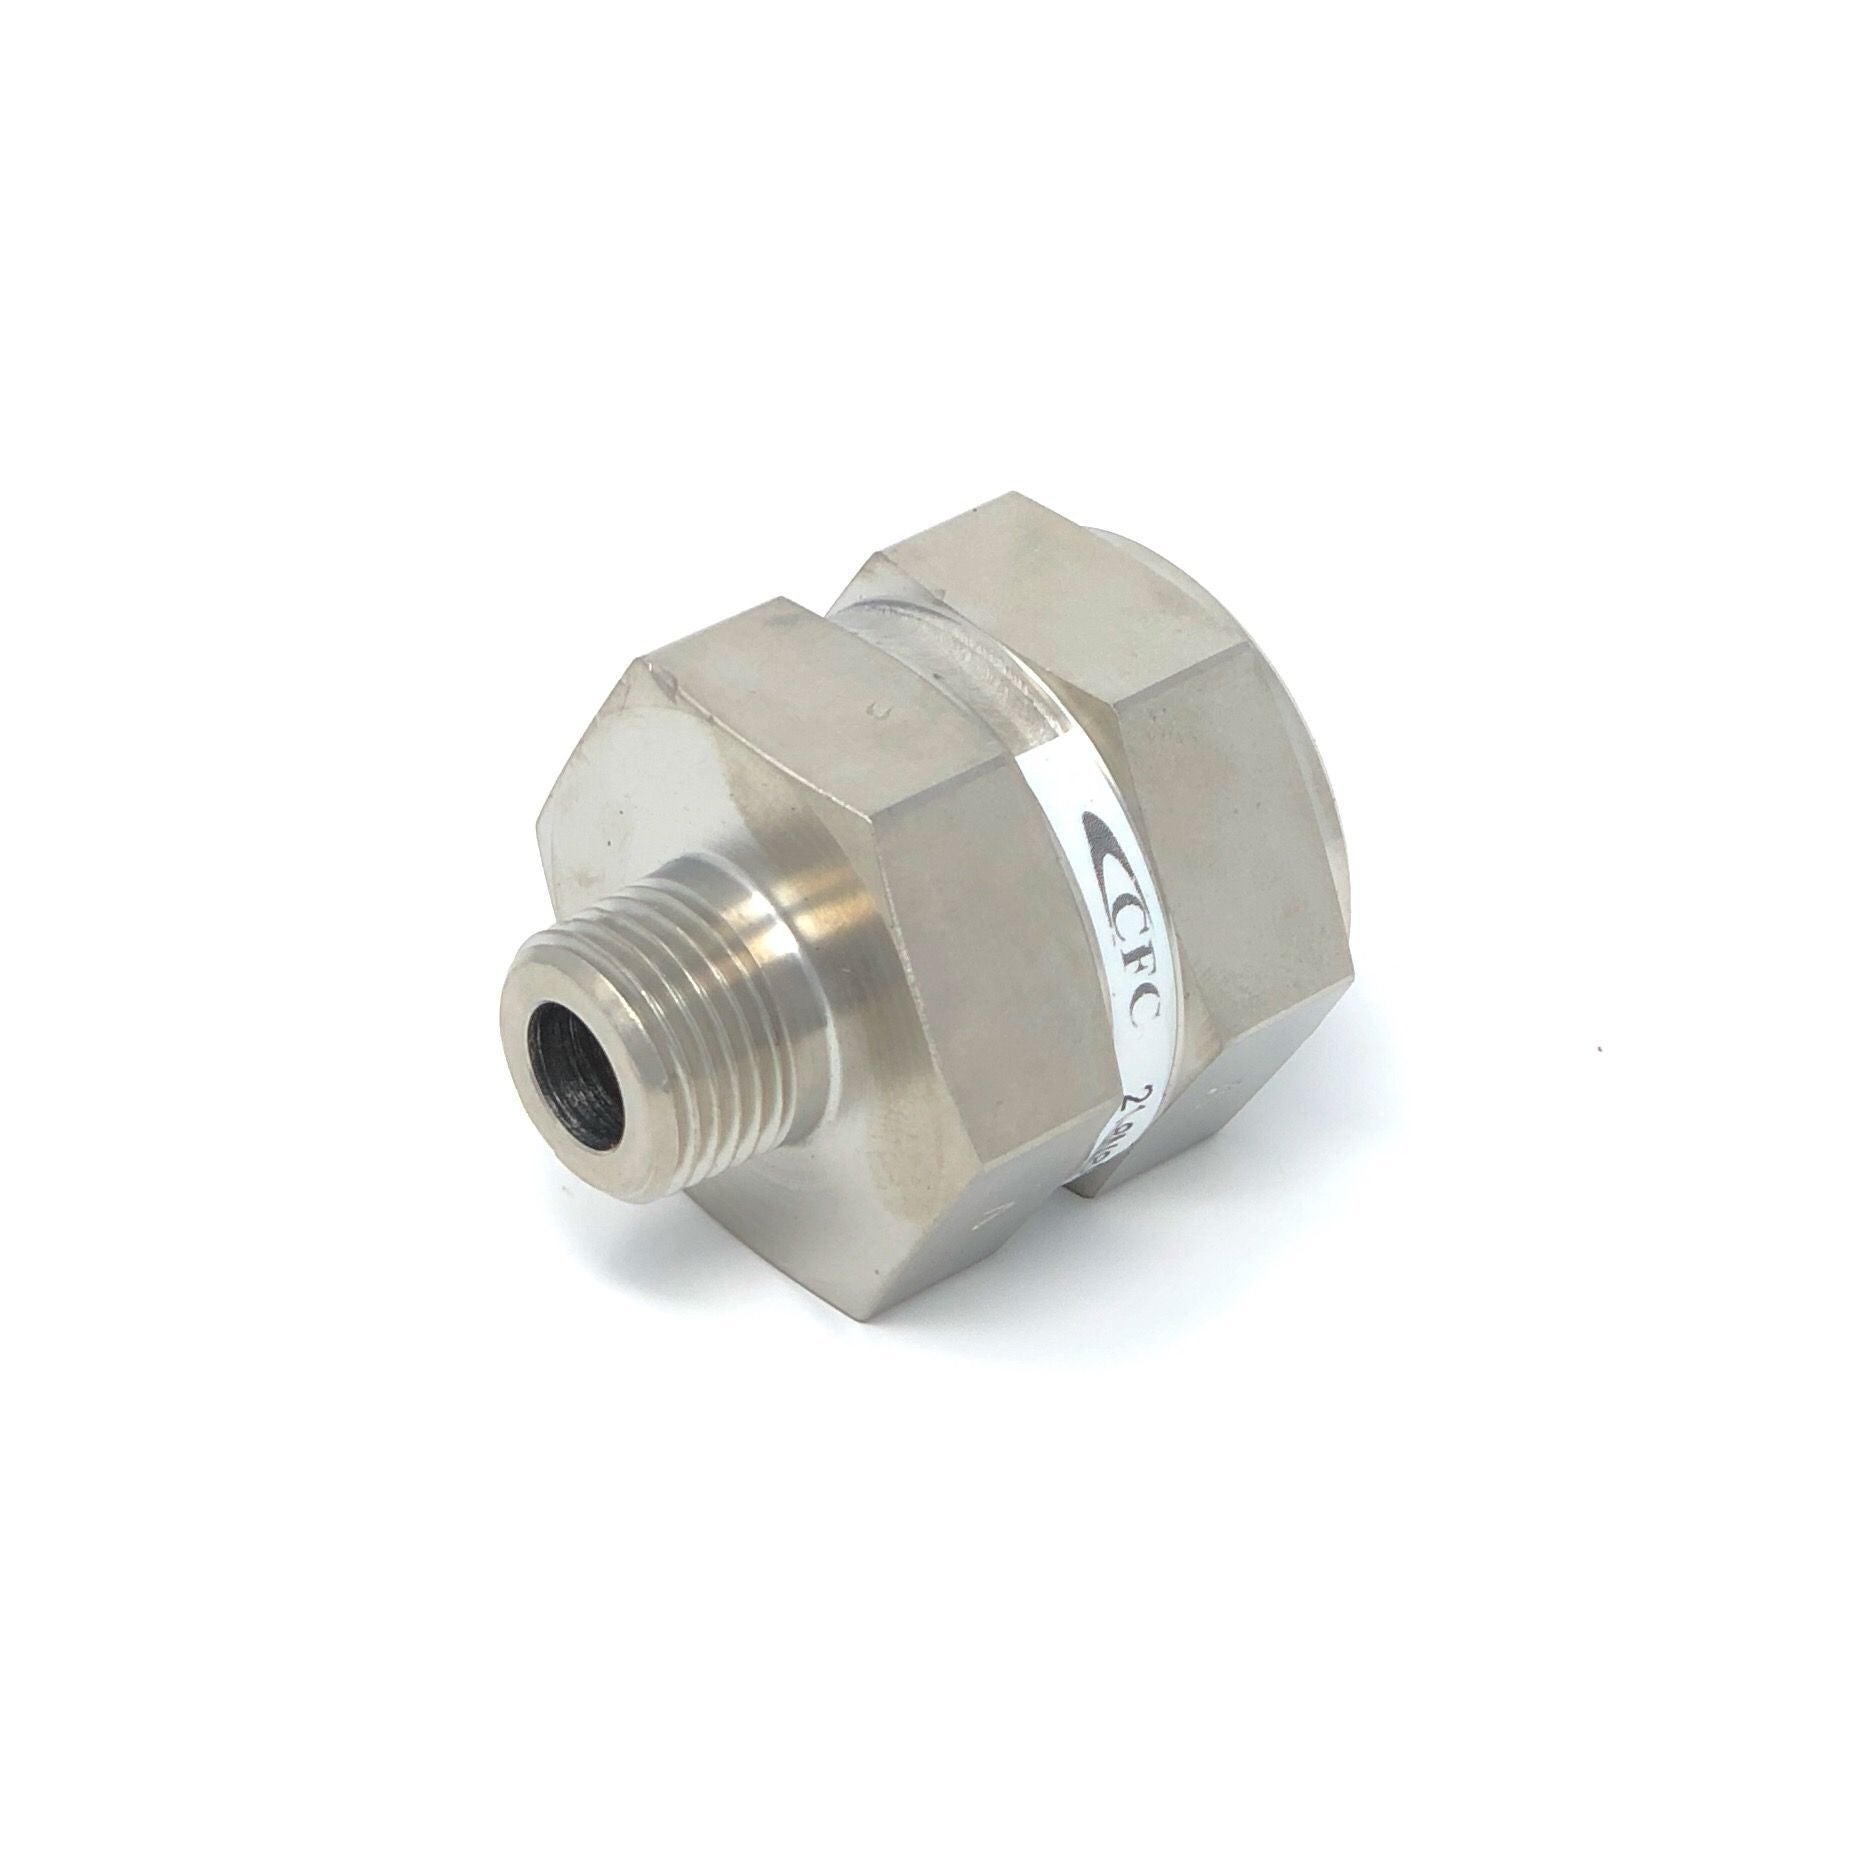 21-6T6T-25S : Chase High Pressure Inline Filter, 6000psi, 3/8" 37 Degree Flare , 25 Micron, No Visual Indicator, No Bypass